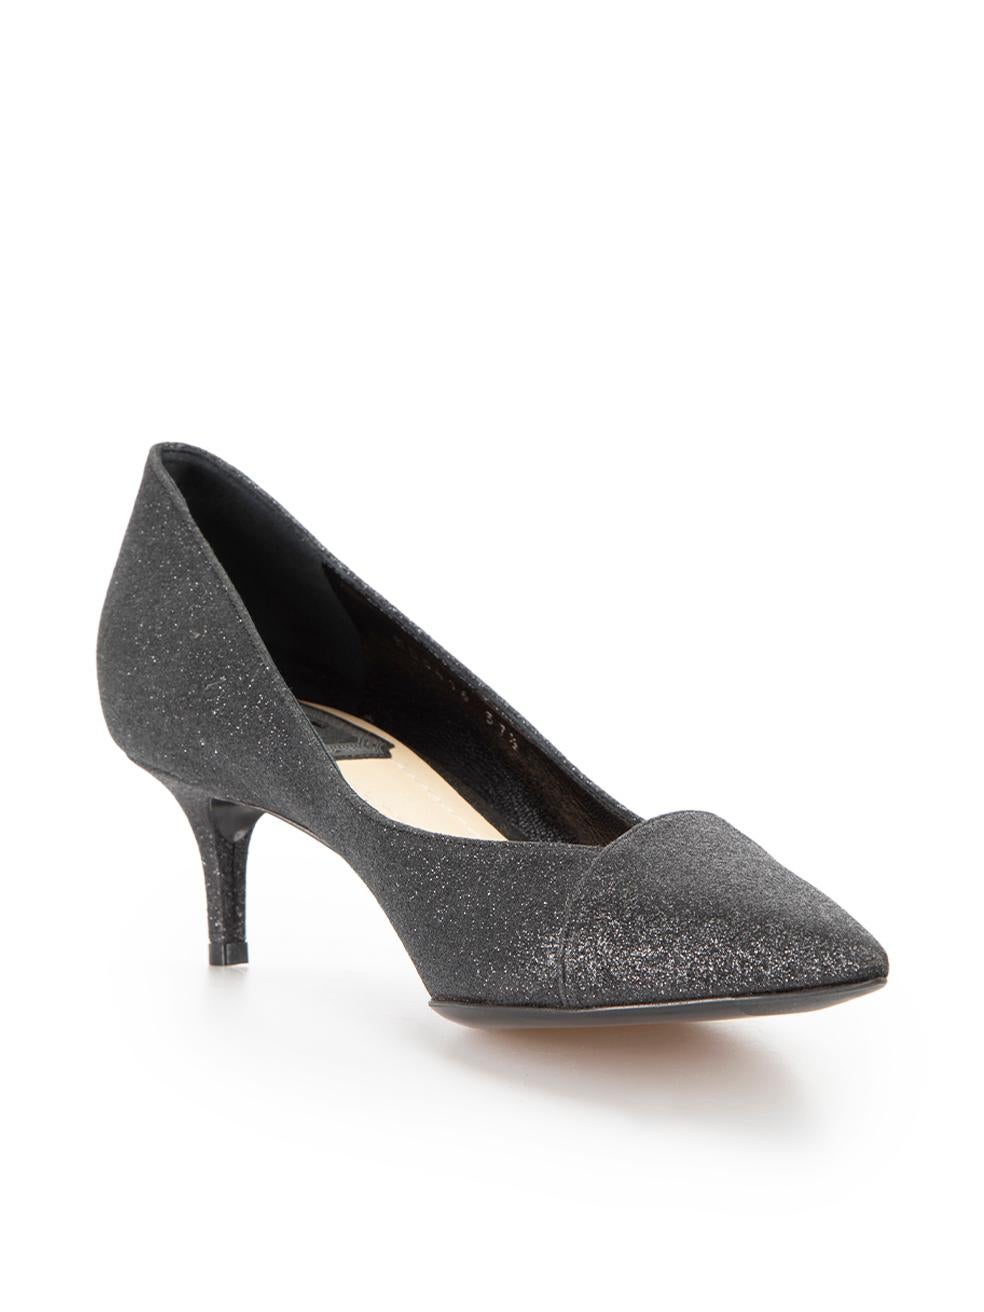 CONDITION is Never Worn. No visible wear to shoes is evident on this used Christian Dior designer resale item.



Details


Black

Glitter

Slip-on pumps

Point-toe

Kitten heel



 

Made in Italy 

 

Composition

EXTERIOR: Glitter

INTERIOR: